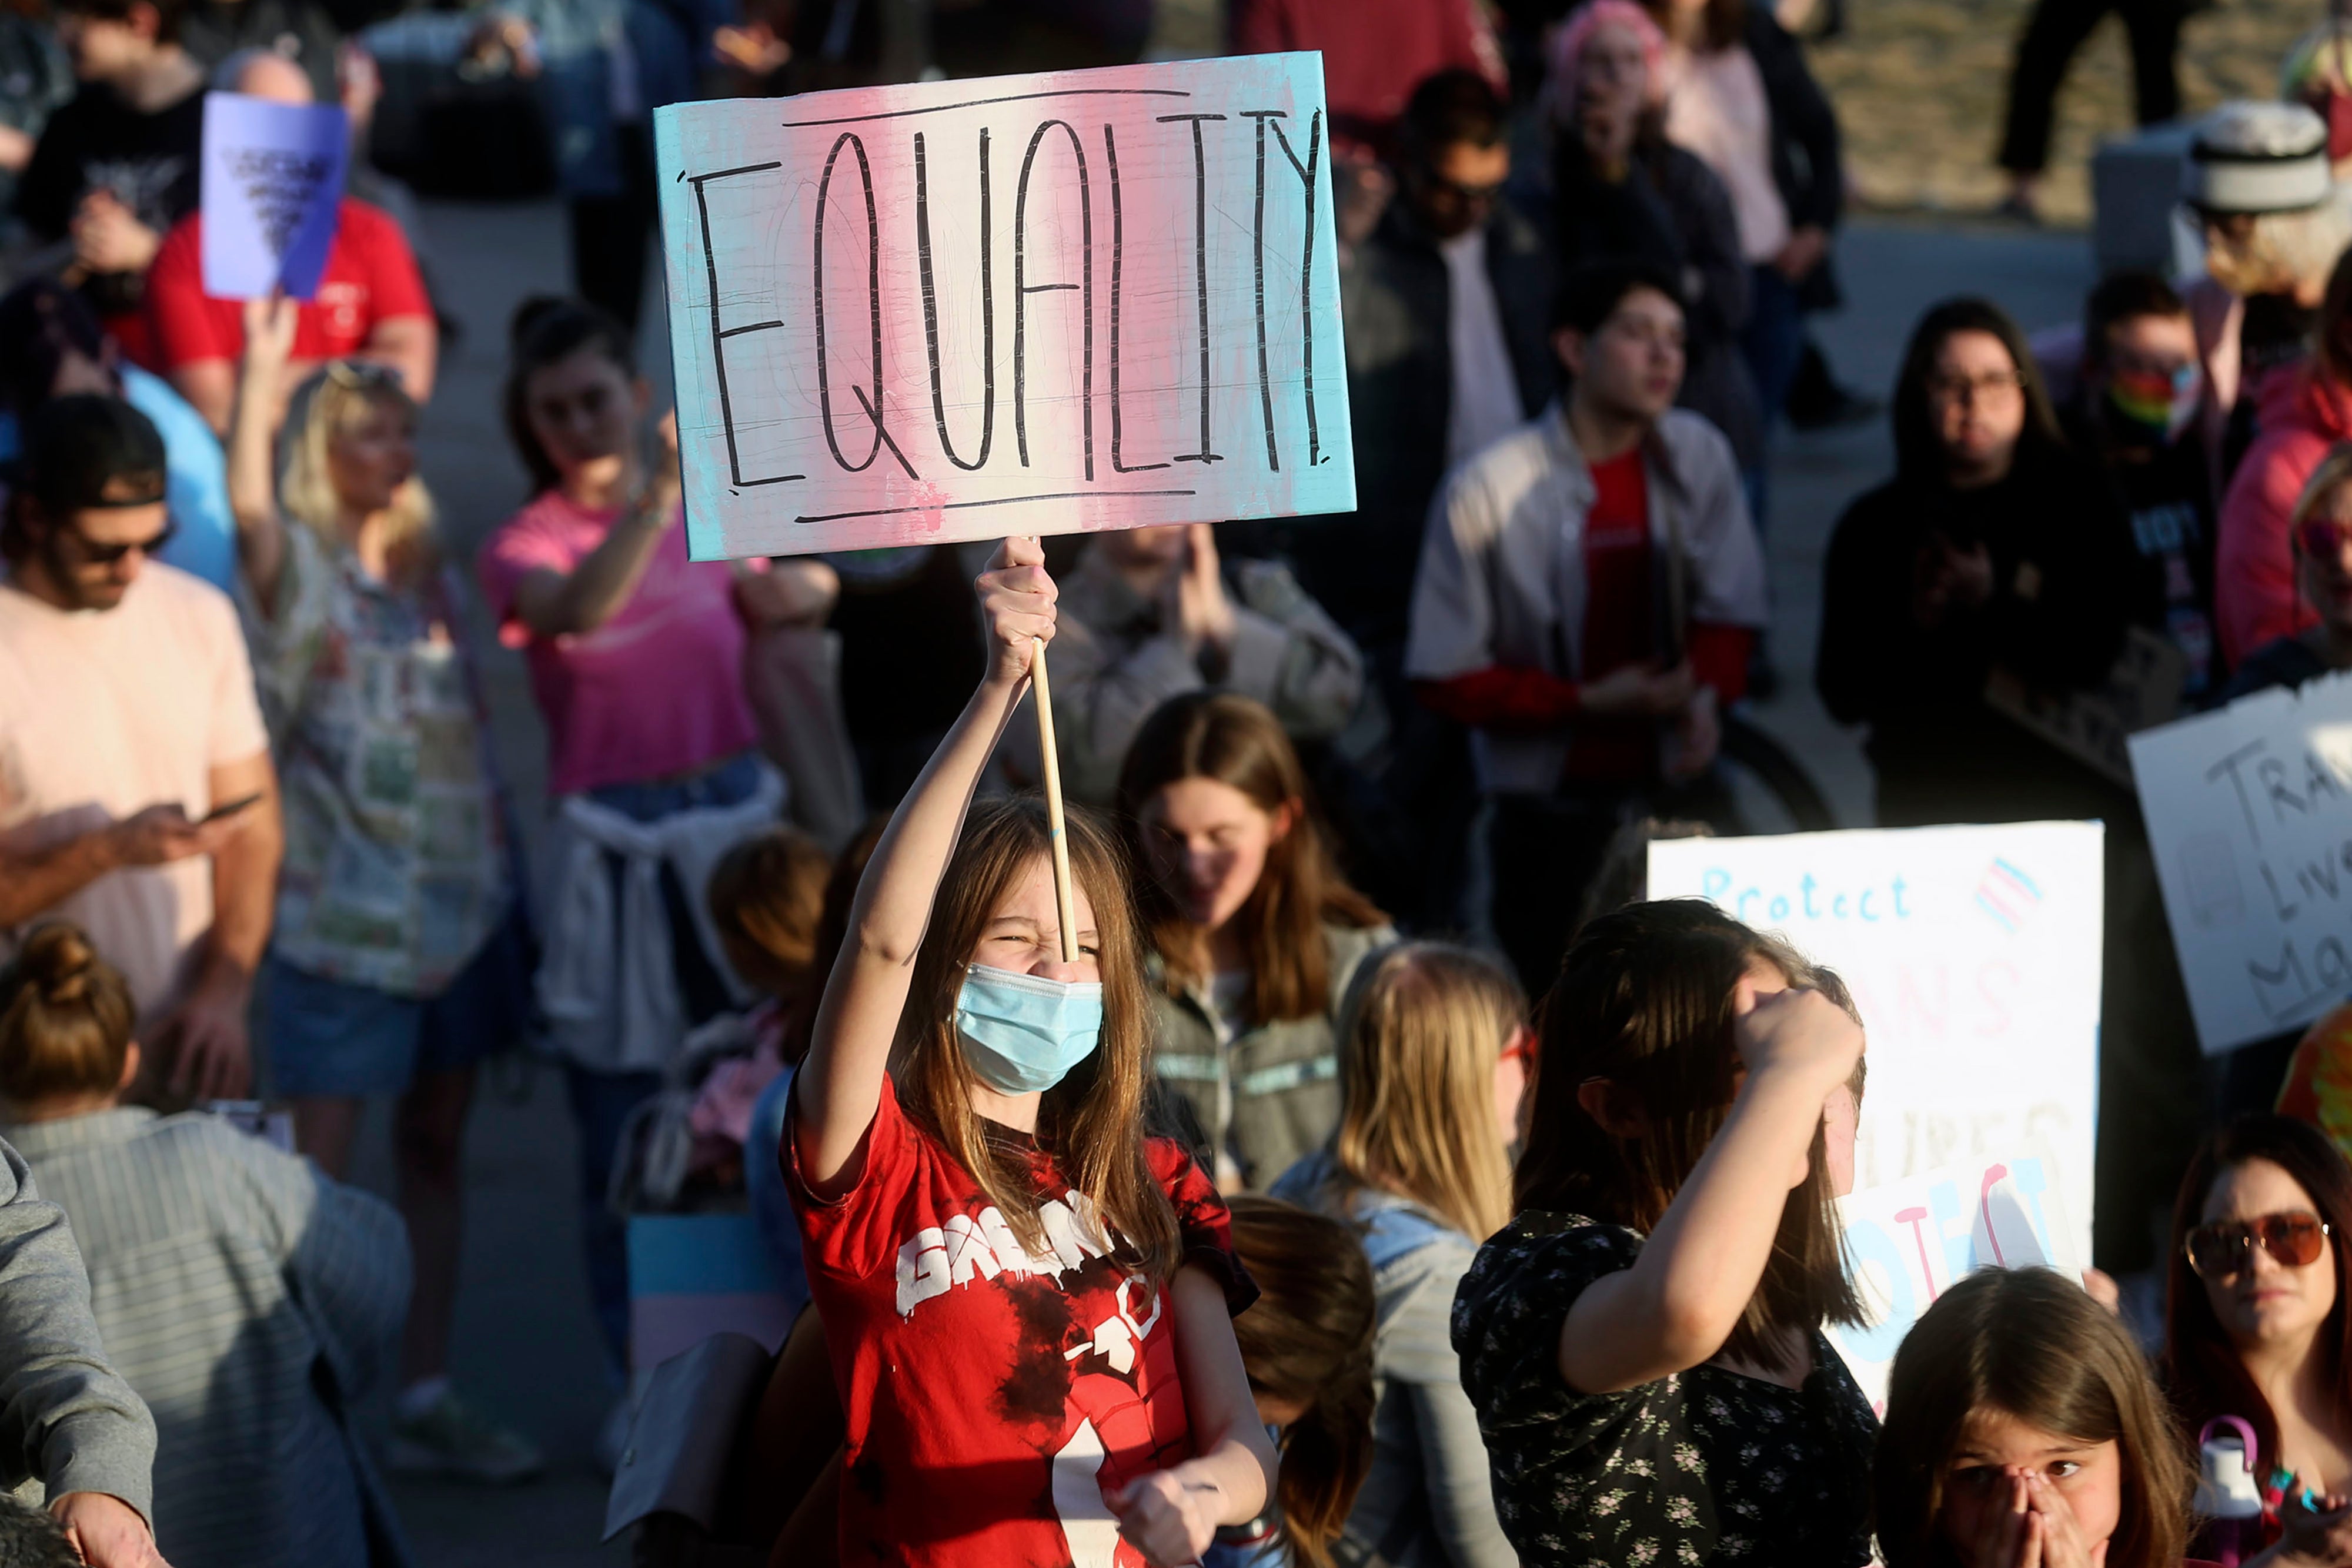 A young protester urges Utah legislators to reject legislation banning transgender athletes from women’s sports at a demonstration on 24 March.